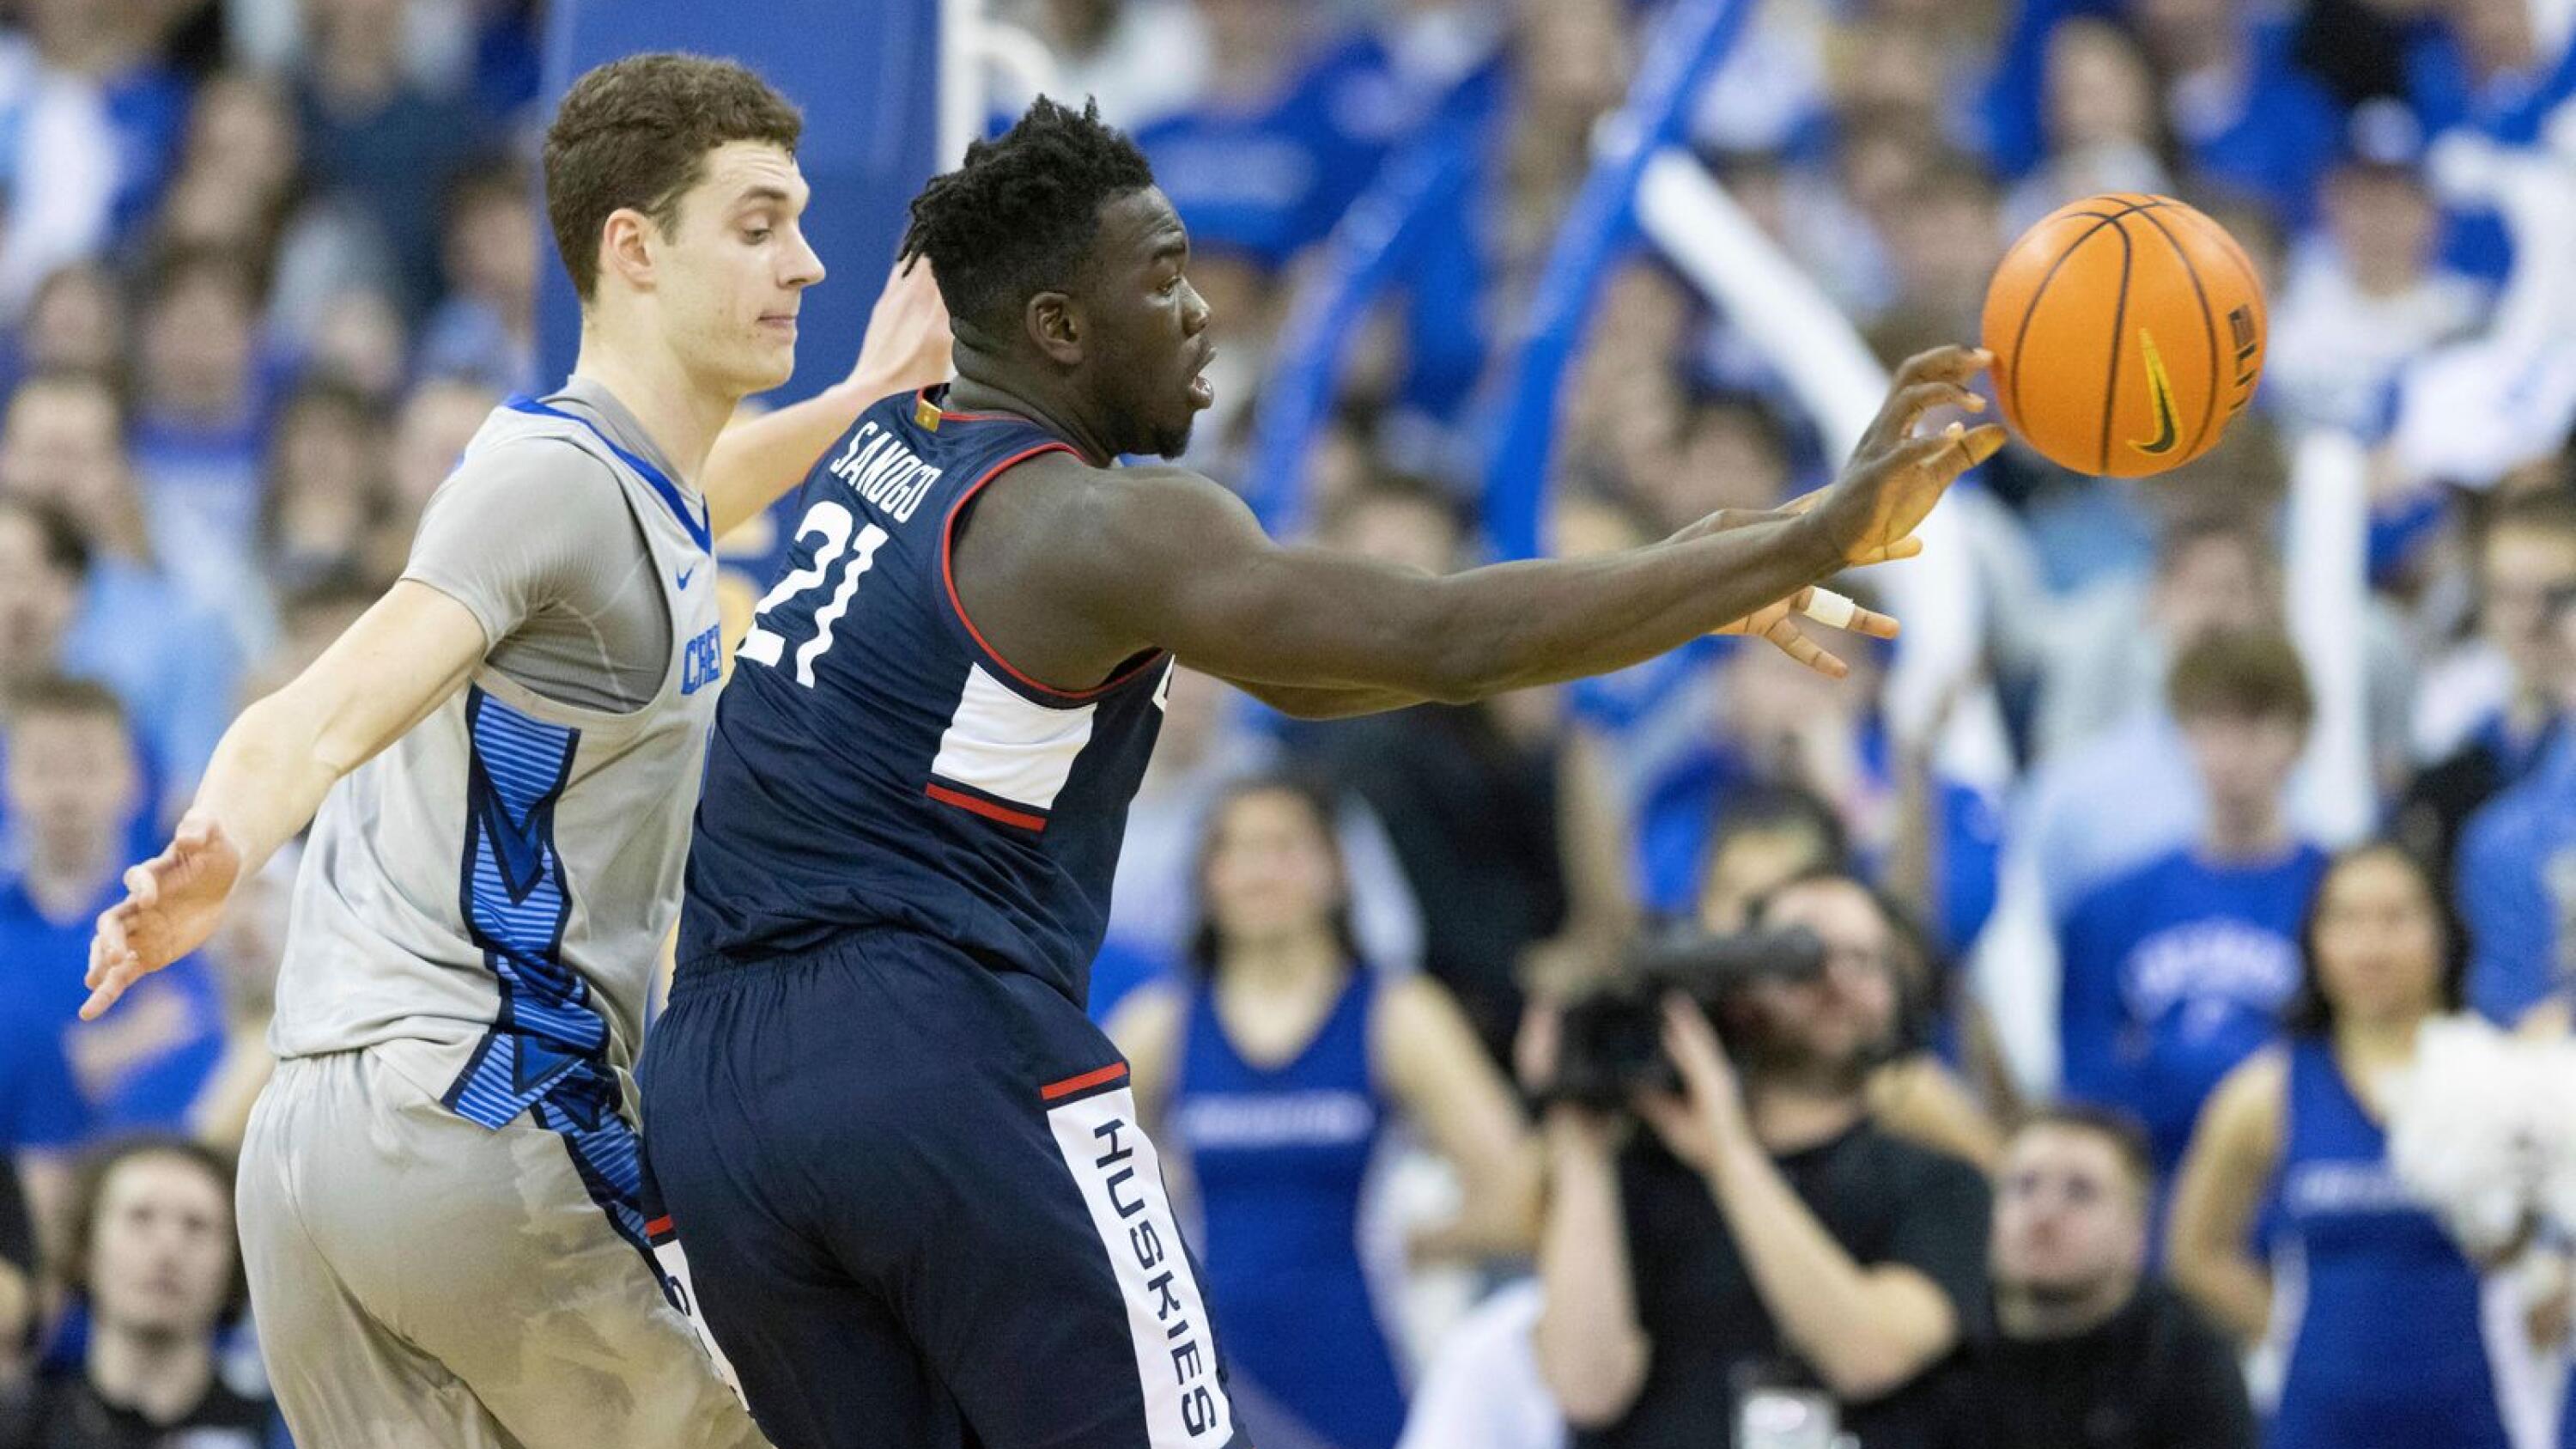 UConn men looking to build momentum in stretch run, starting